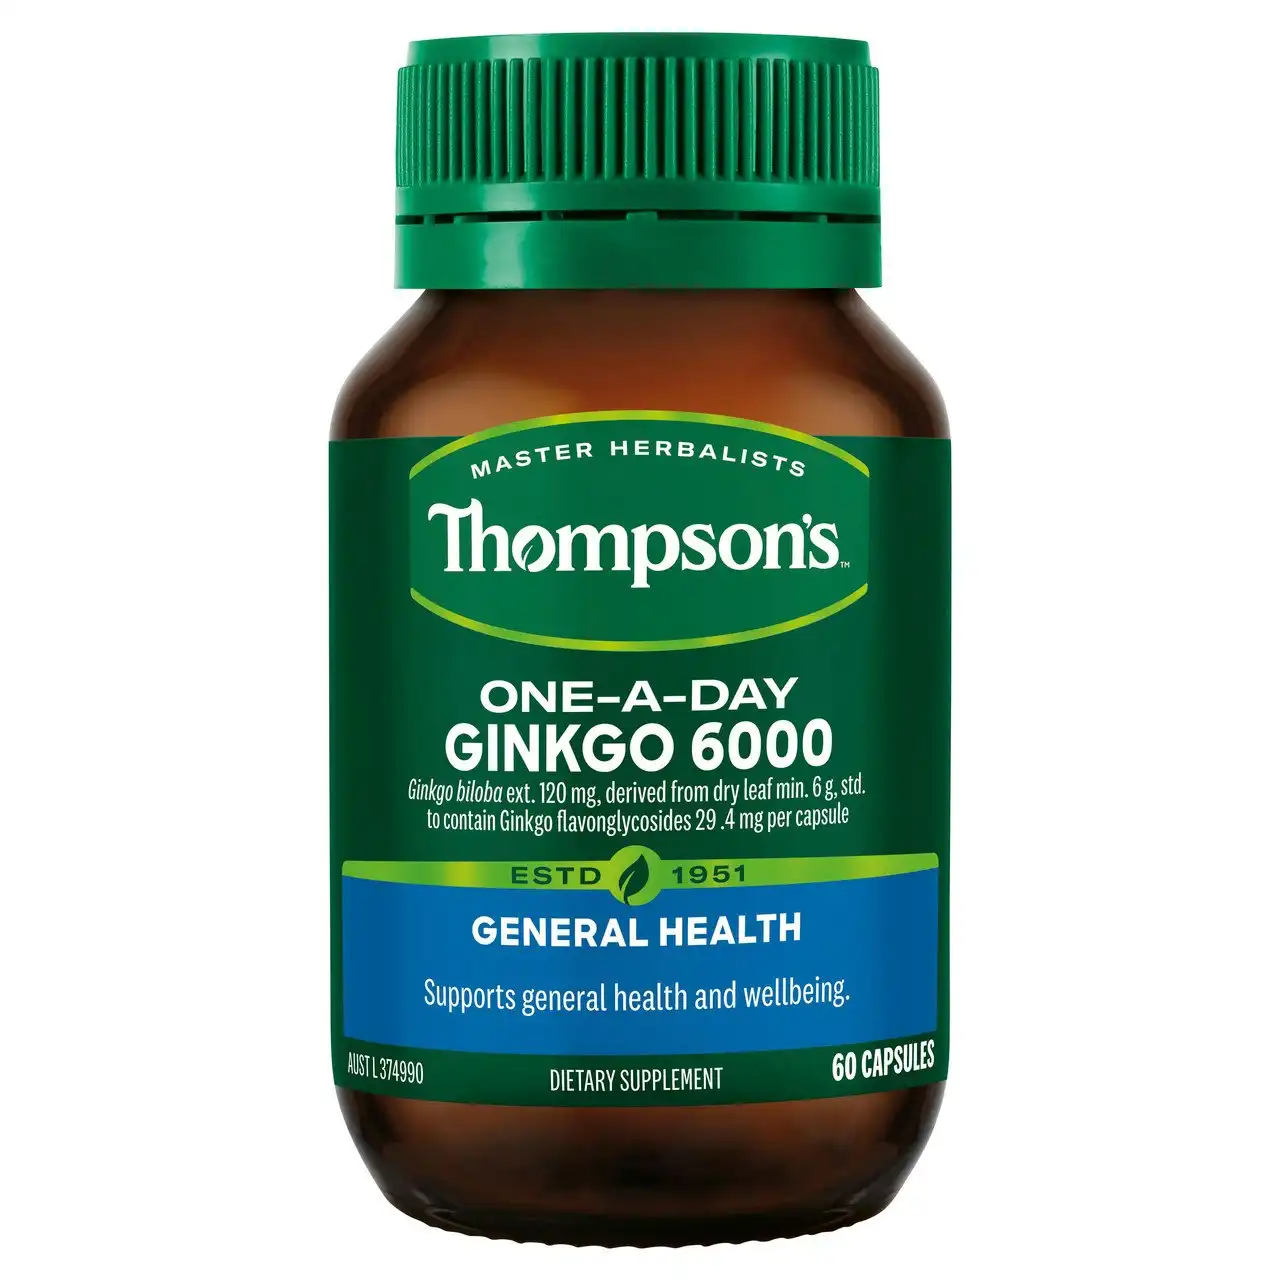 Thompson's One-a-Day Ginkgo 6000 60 Capsules